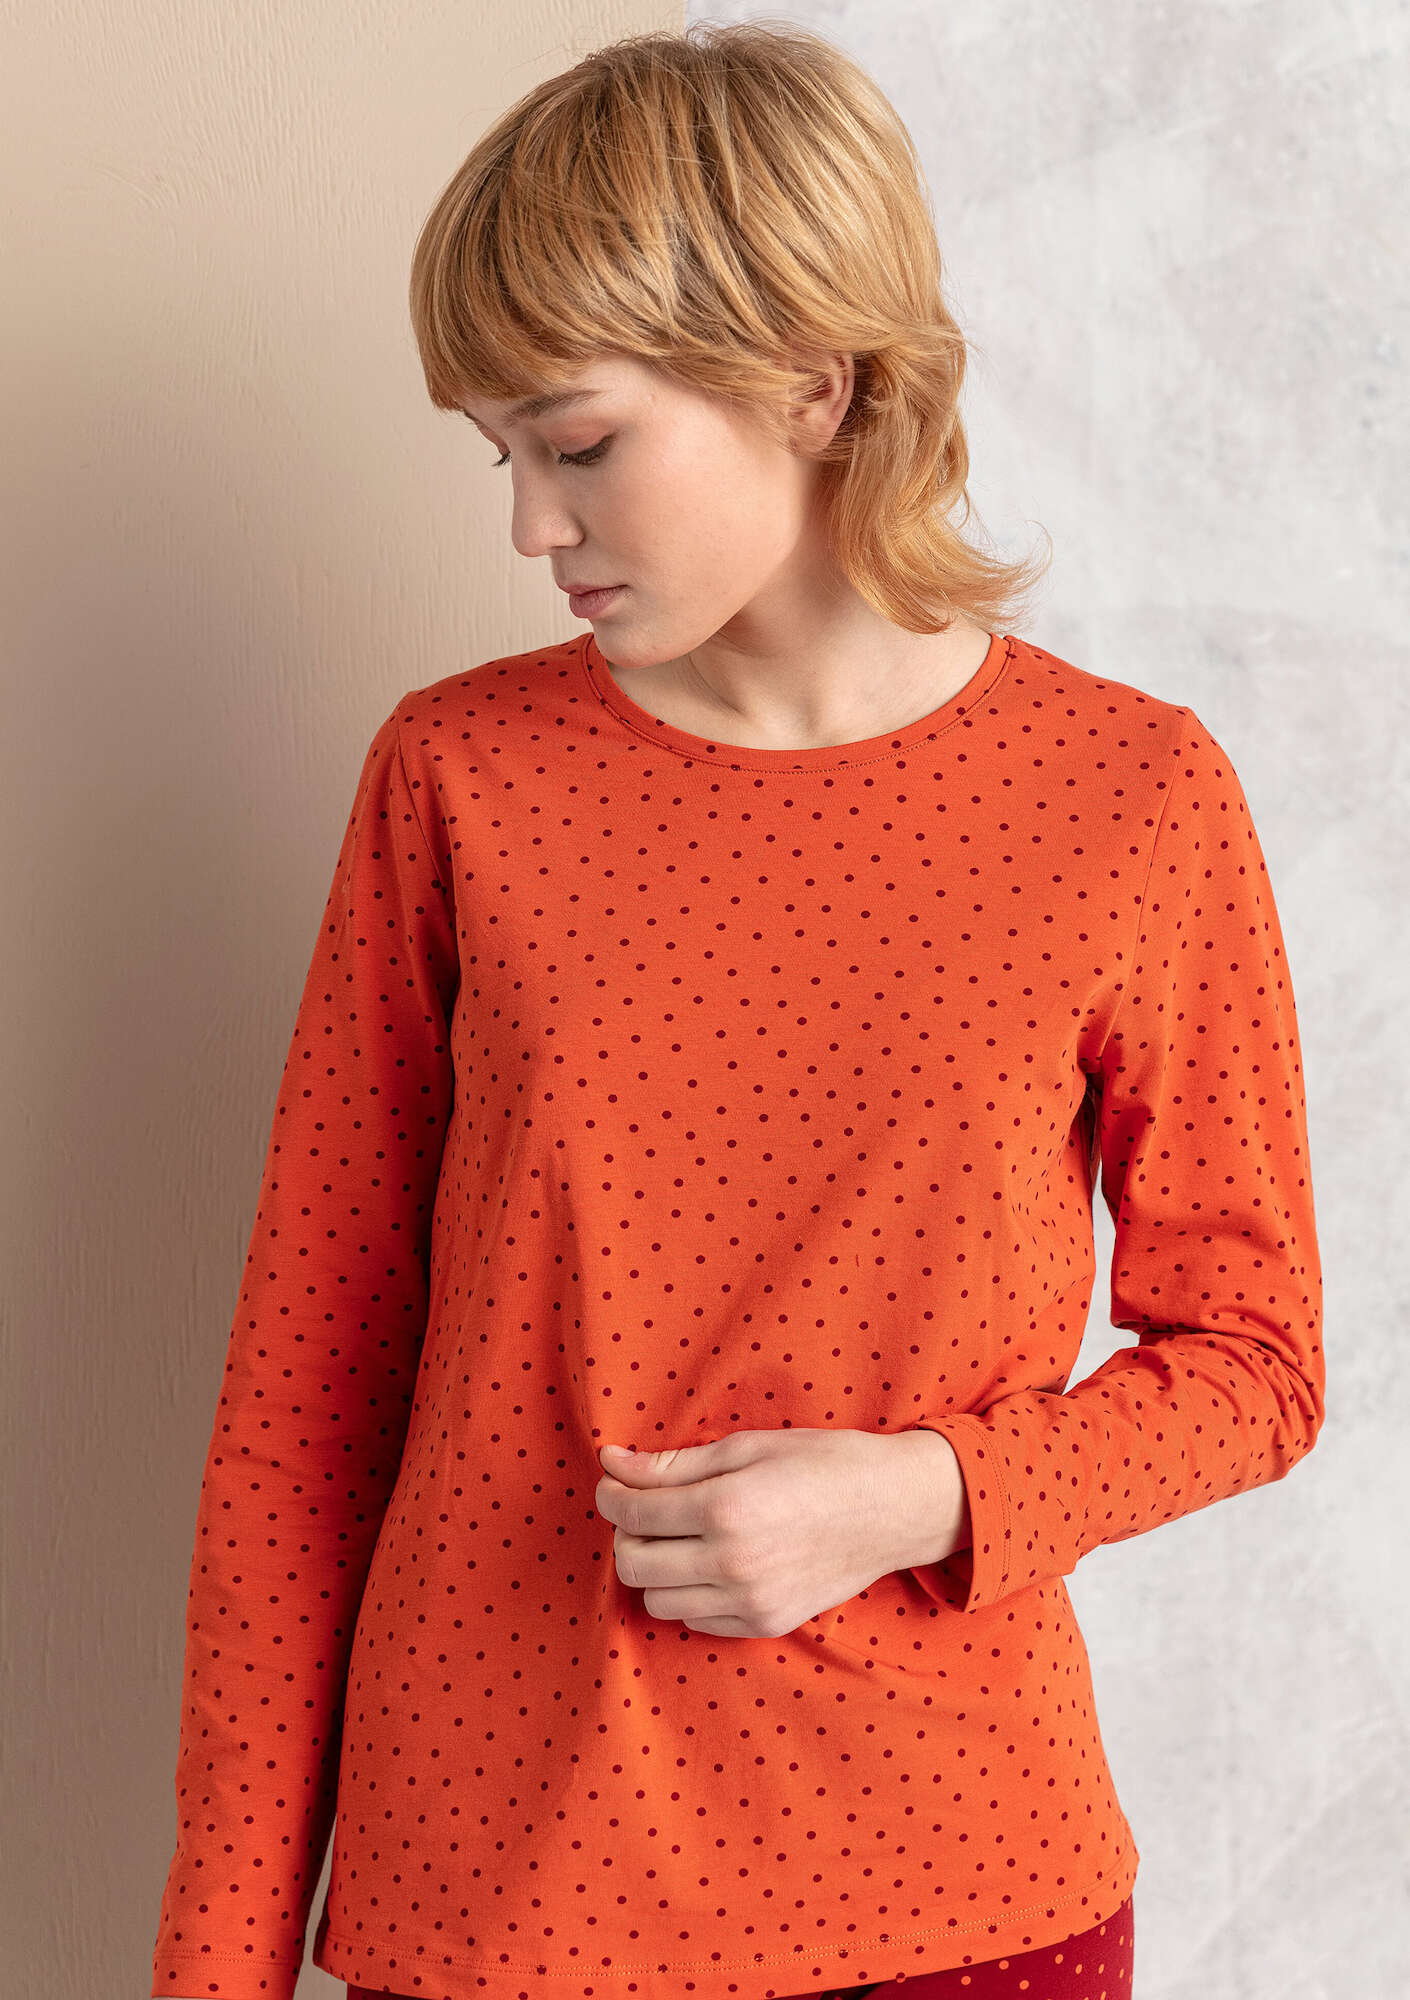 Tricot top Pytte chili/patterned